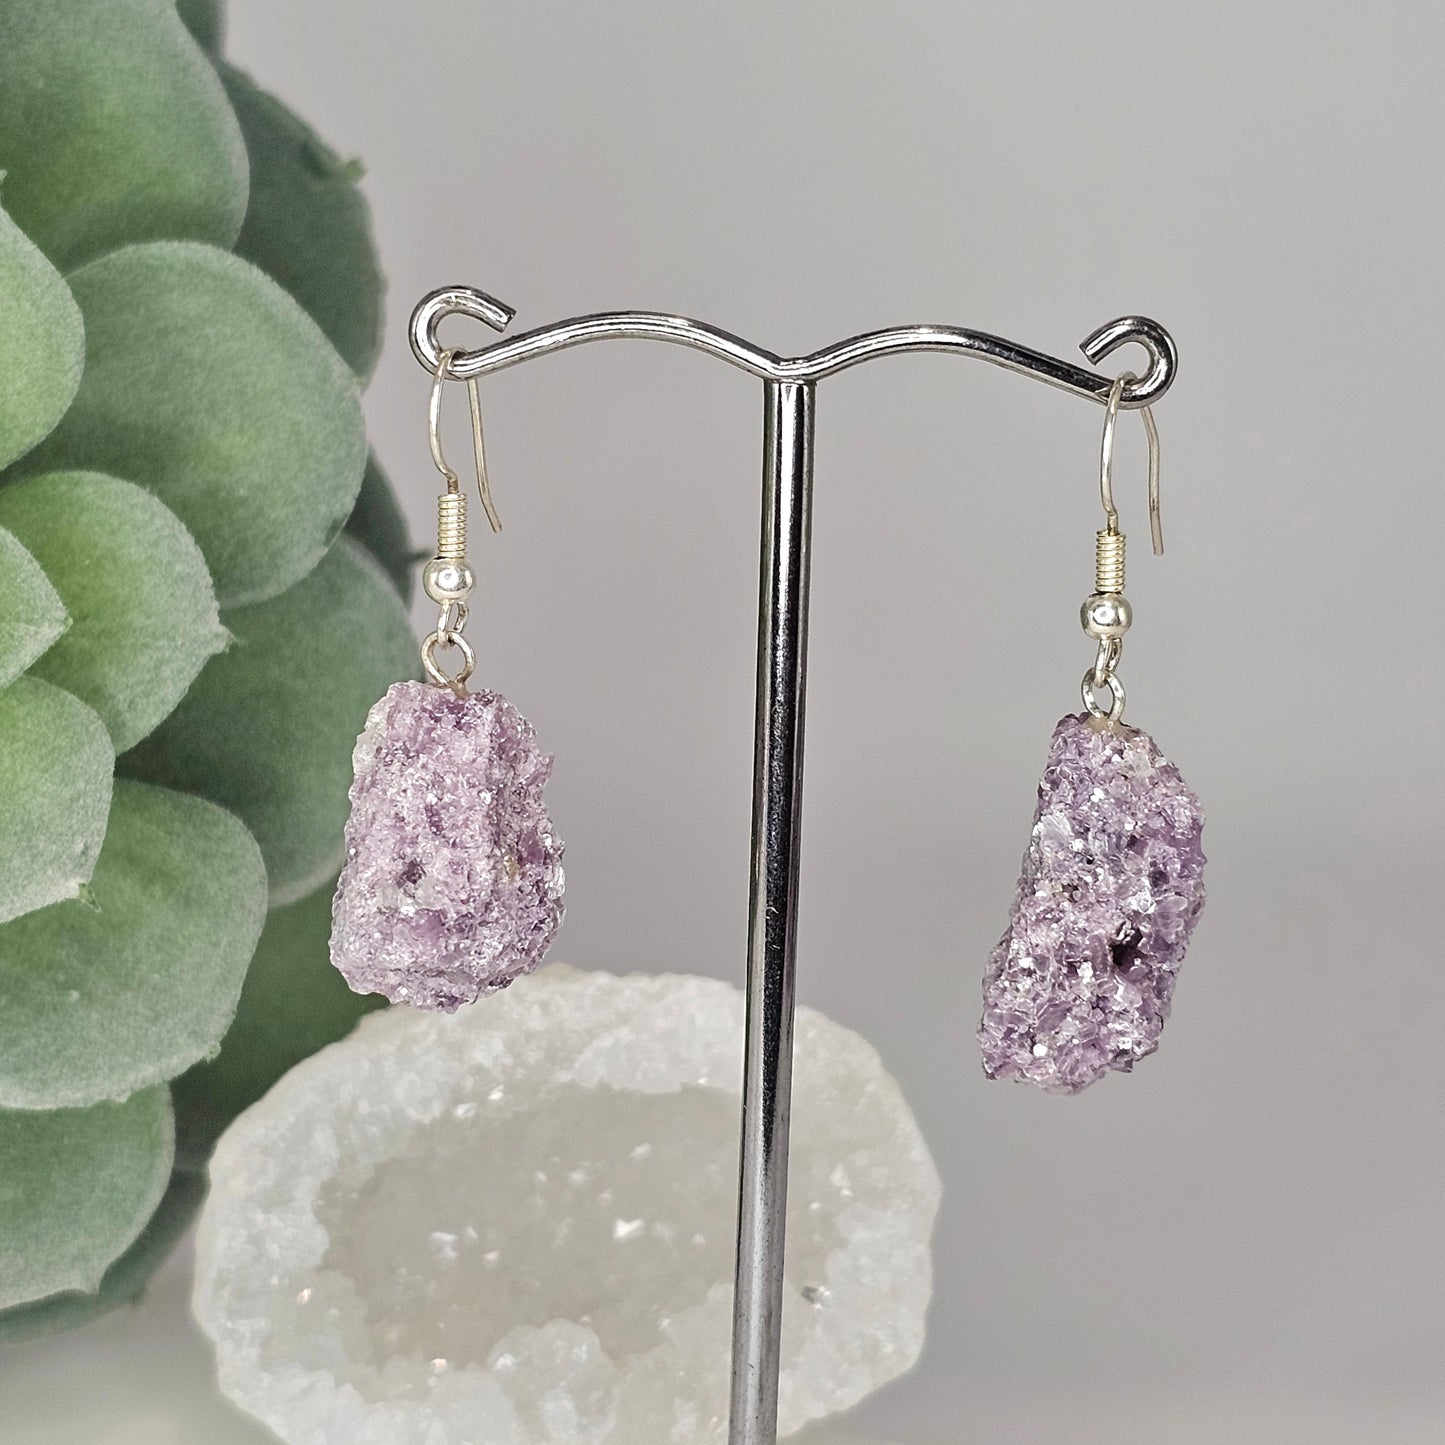 Raw Lepidolite silver plated earrings with hypo-allergenic ear wires.